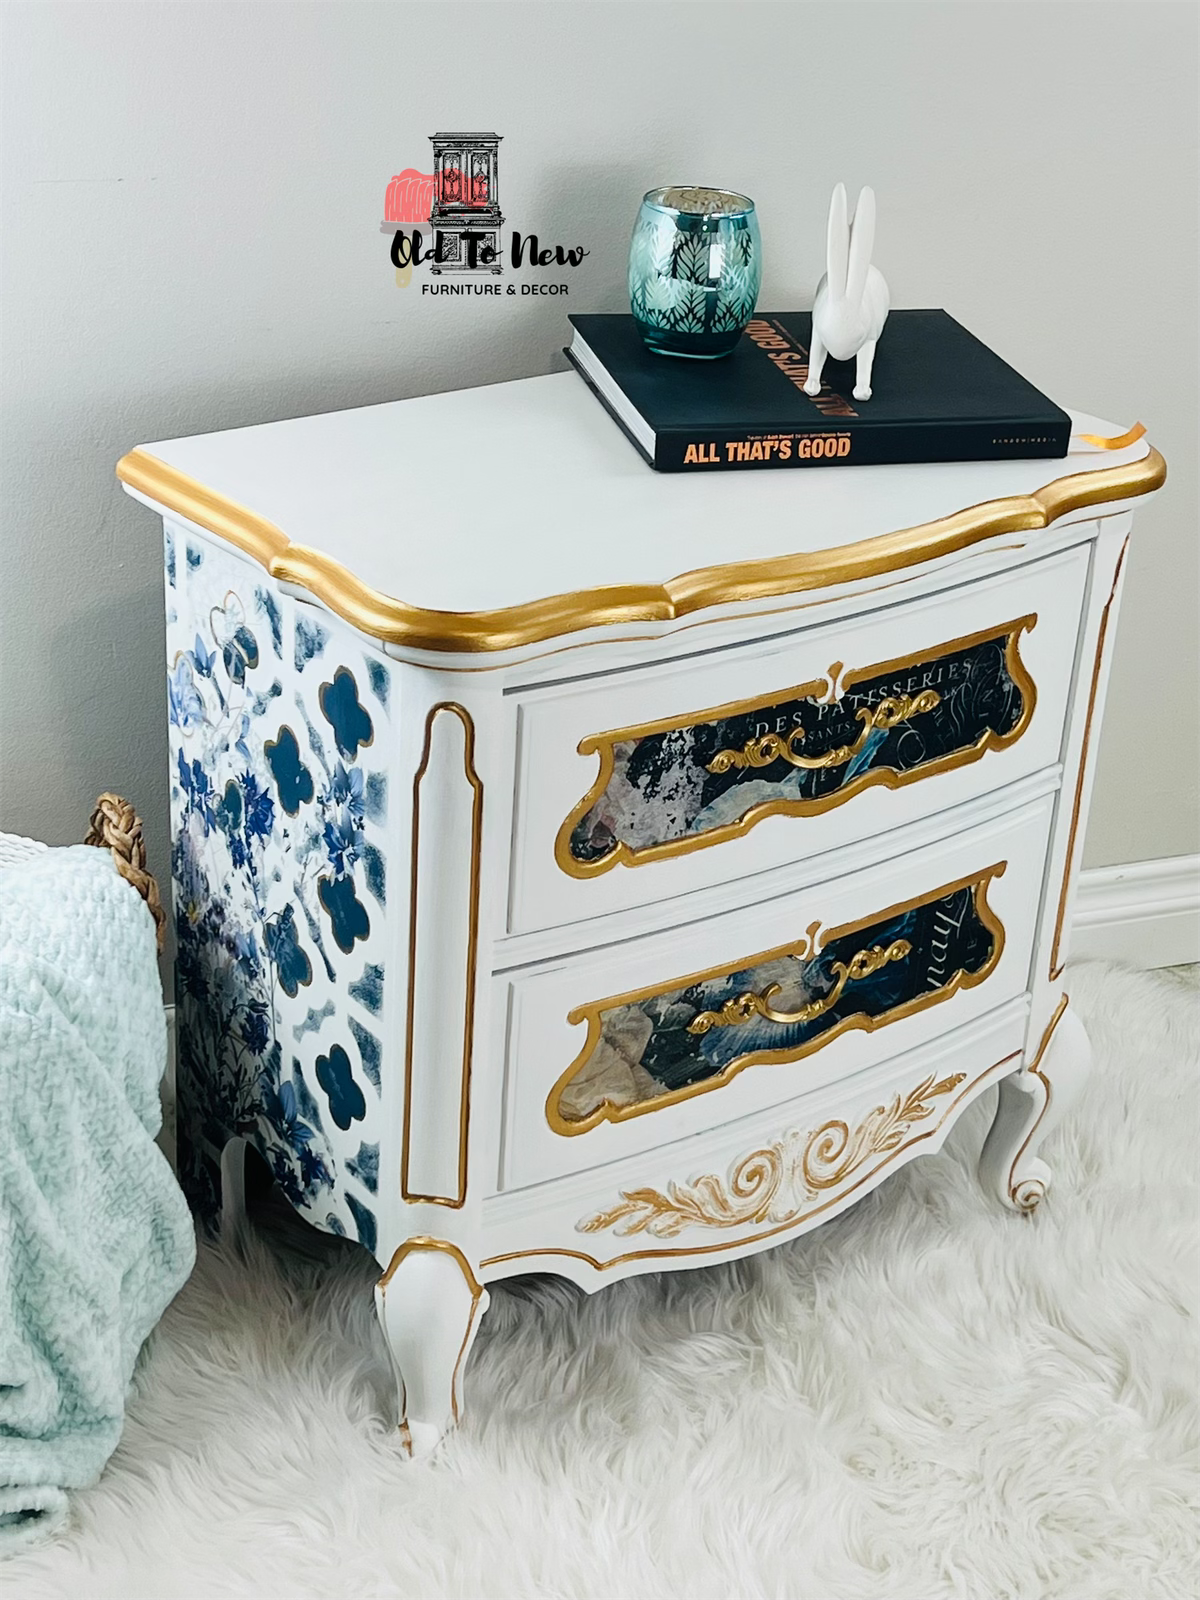 White, Blue, Gold Stunning French Provincial Bedside Table by Toronto Furniture Designer Old To New Furniture & Decor